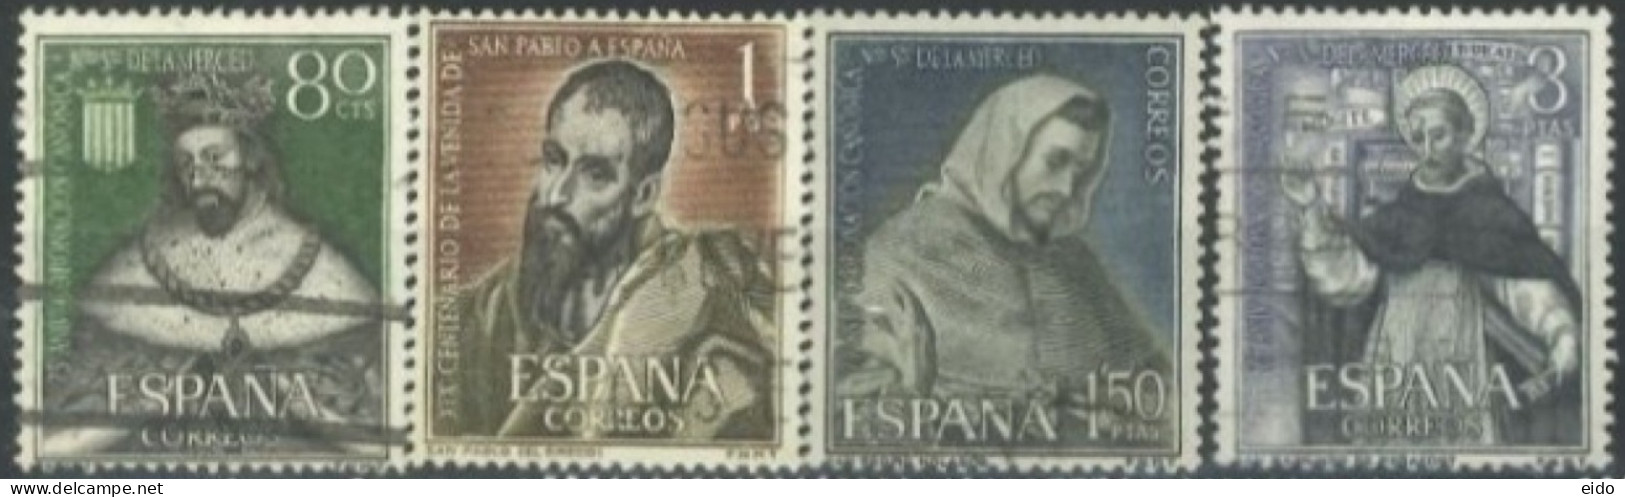 SPAIN, 1963, STAMPS SET OF 4, USED. - Gebraucht